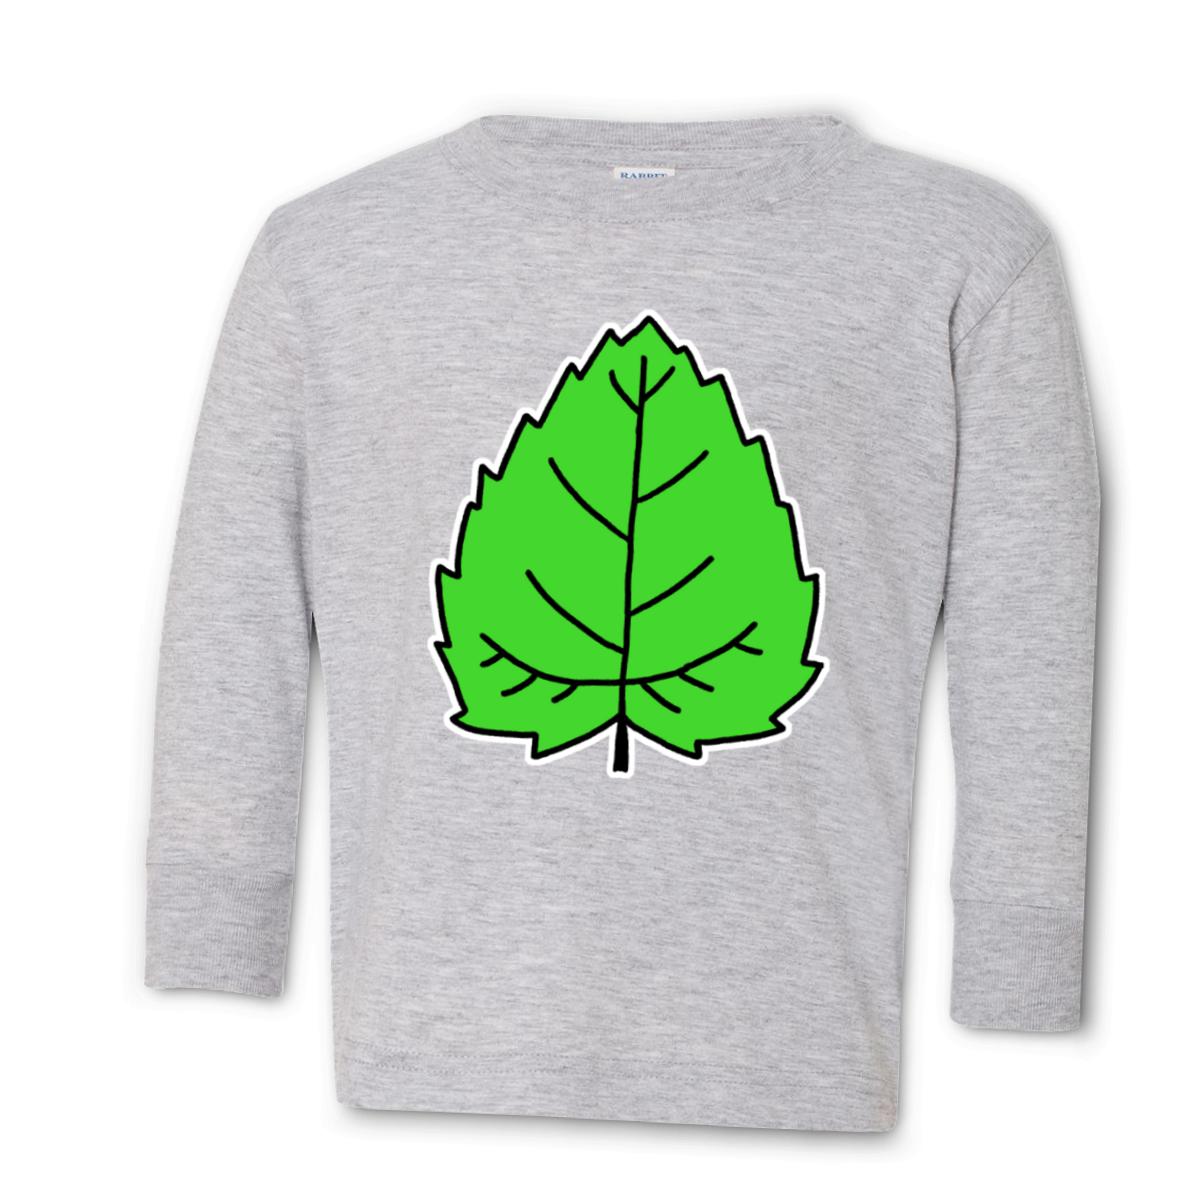 Mulberry Leaf Toddler Long Sleeve Tee 2T heather